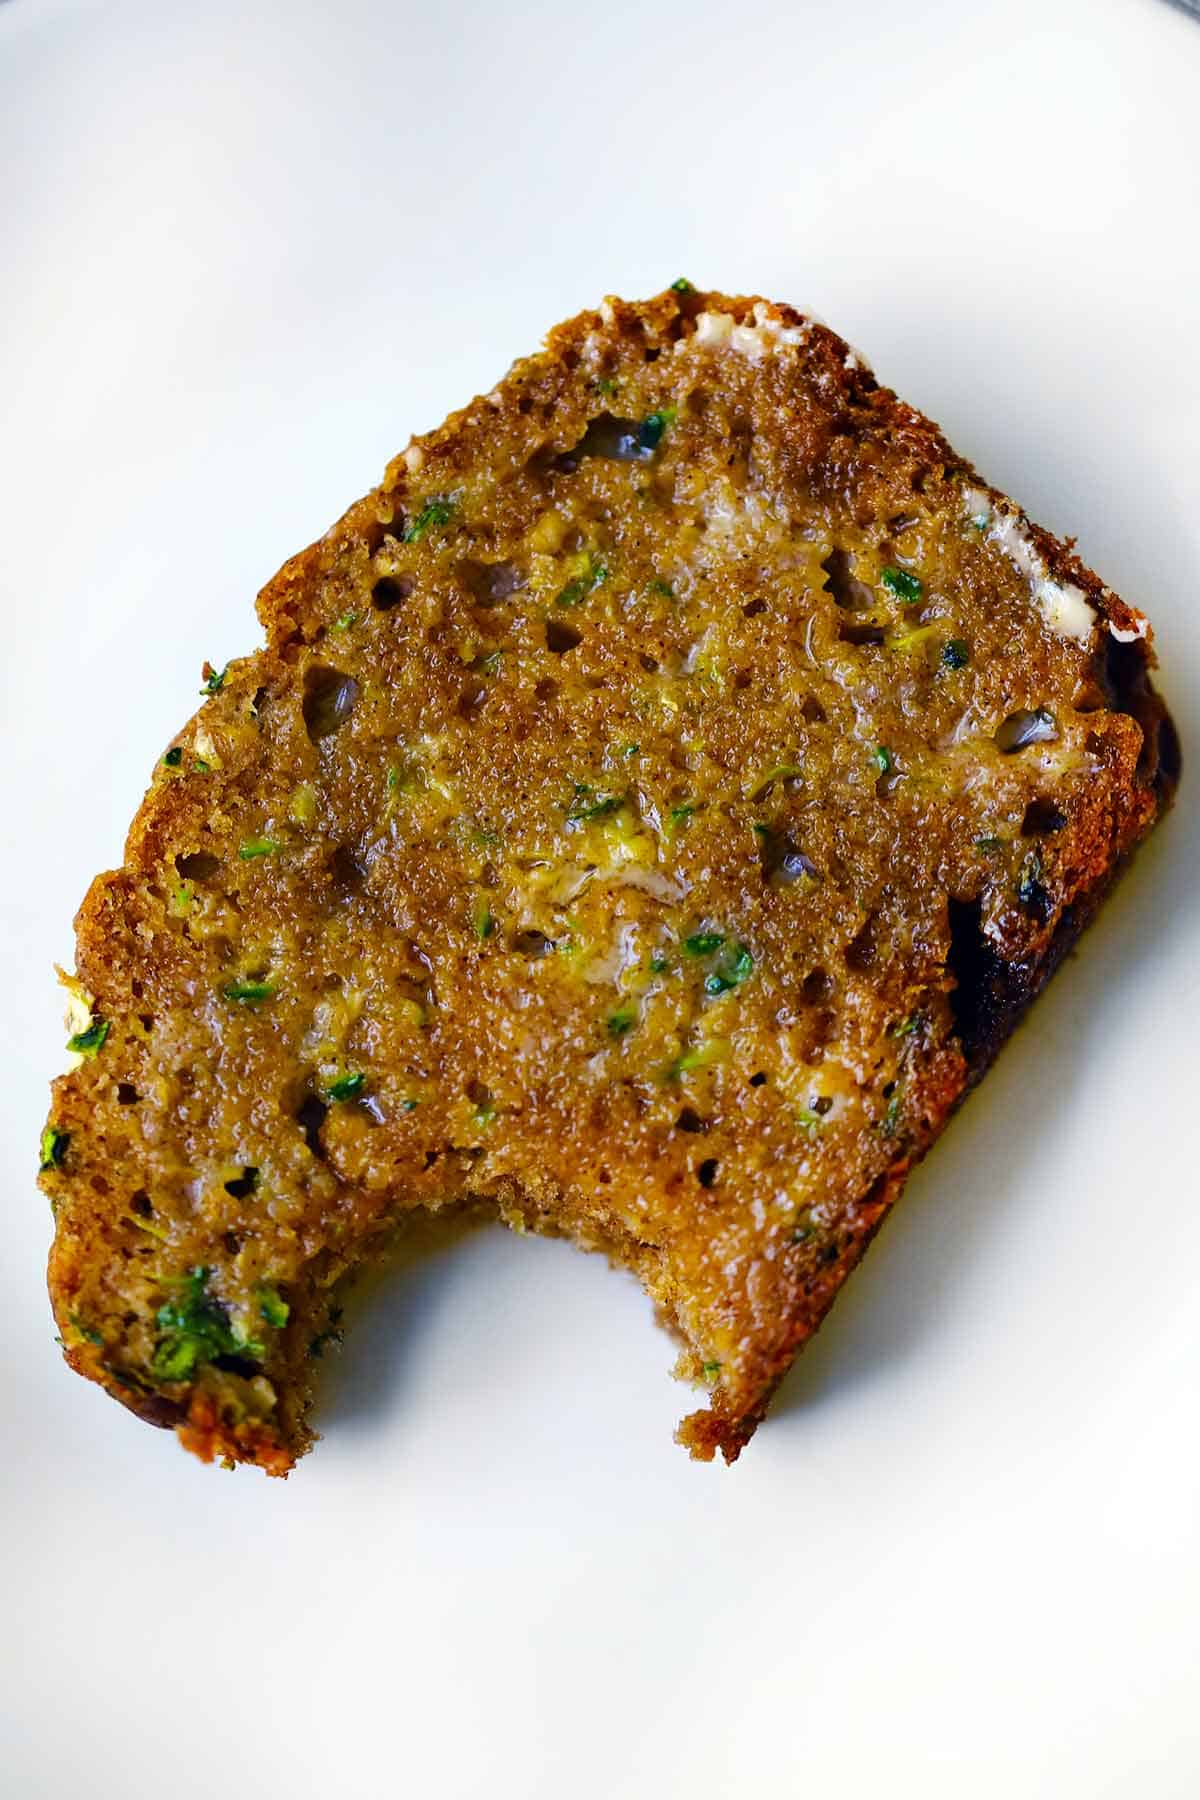 A buttered piece of zucchini bread with a bite taken out showing the texture.